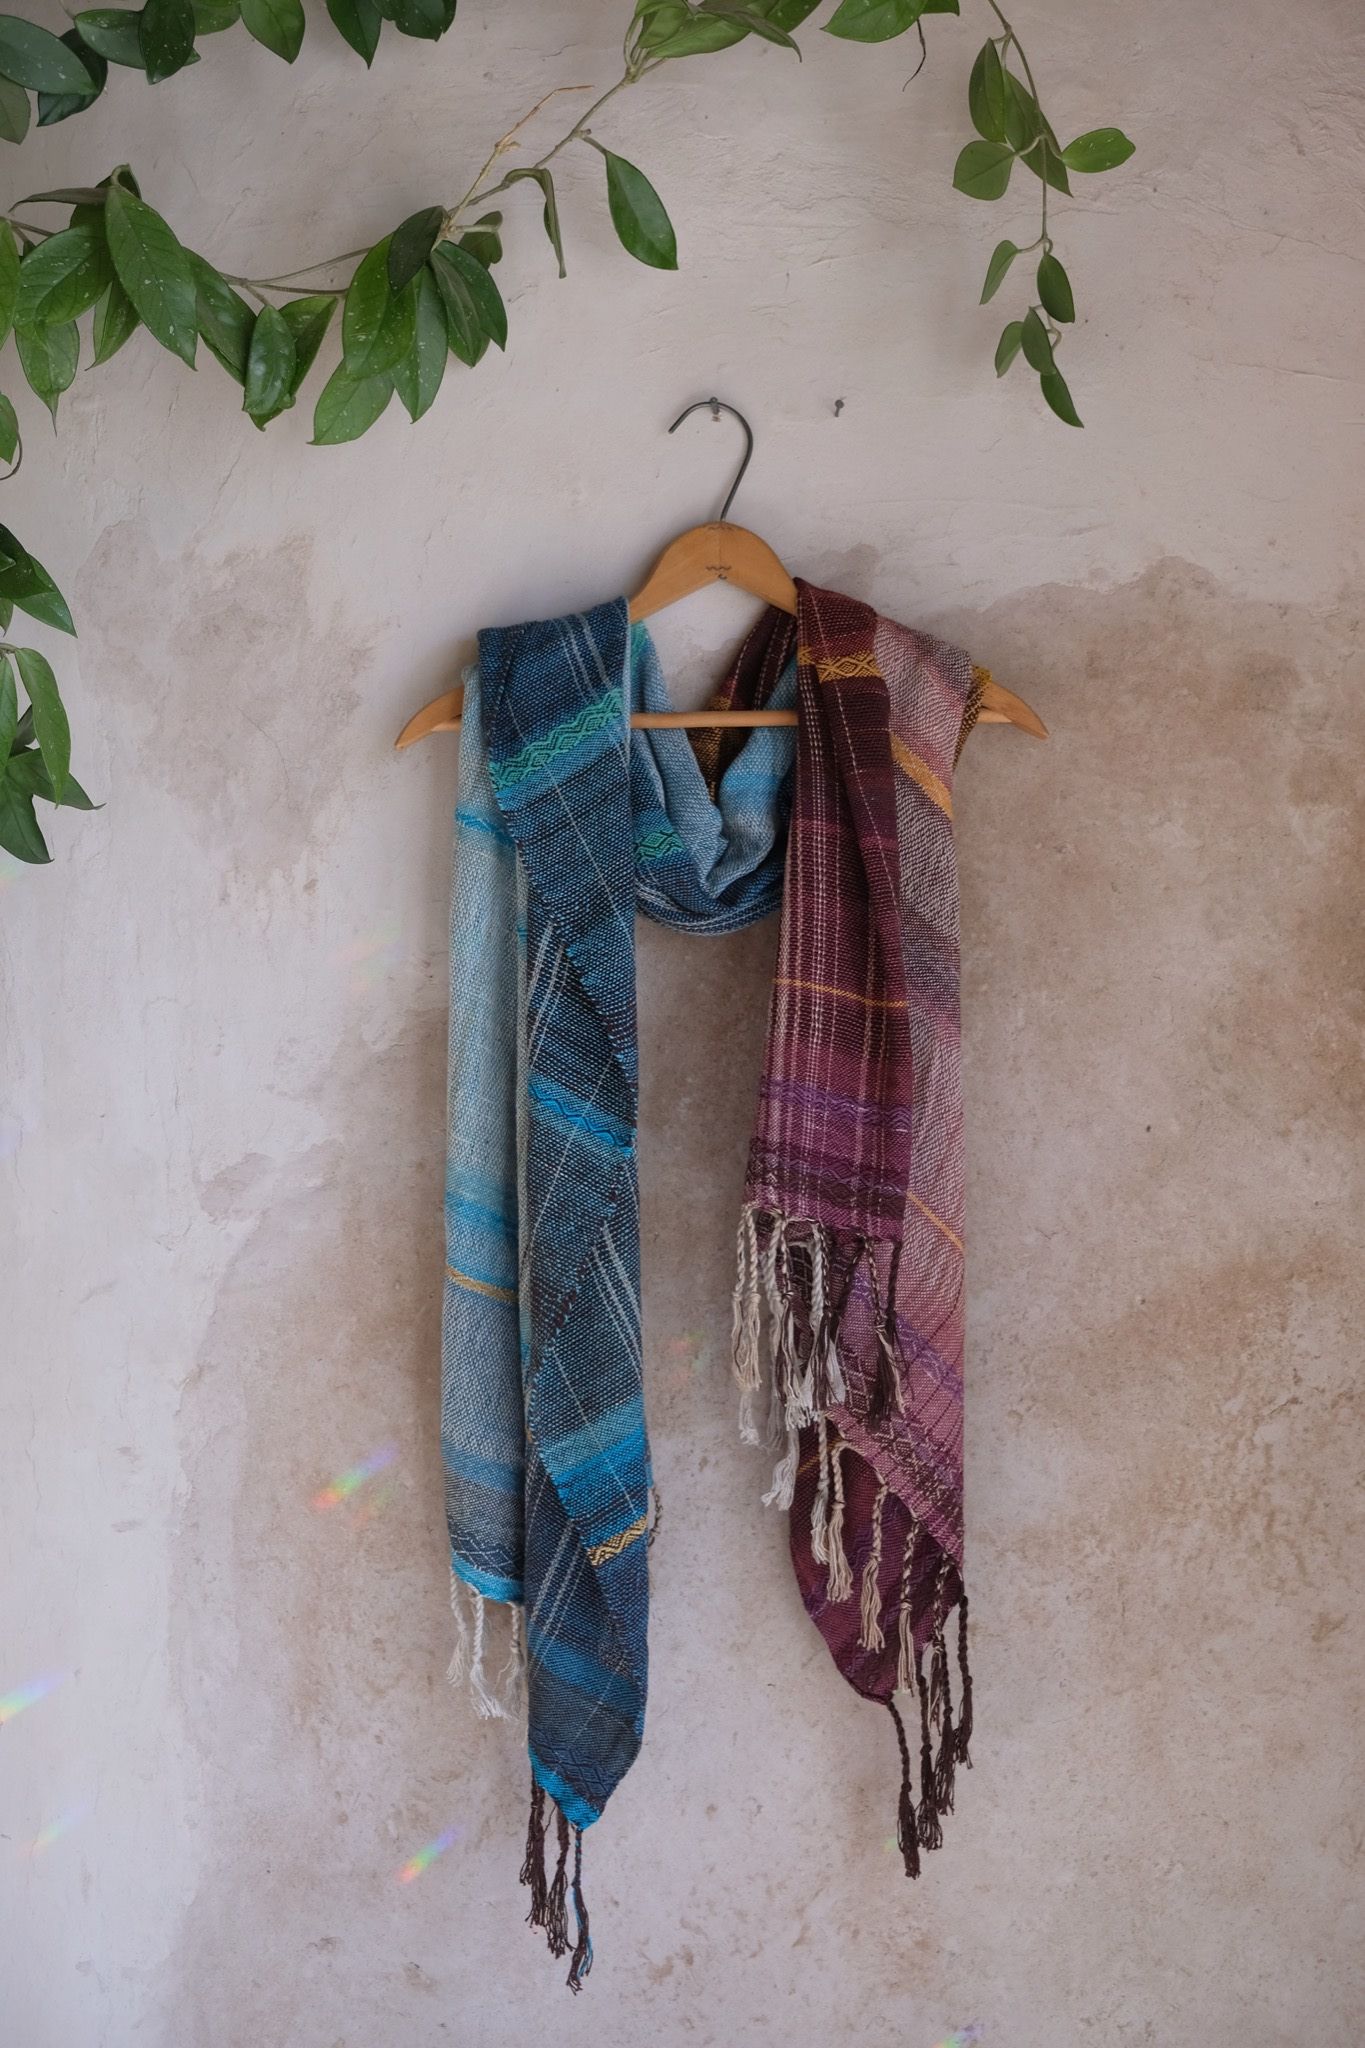 Handwoven maroon, blue, purple and yellow scarf on a hanger, hanging on a tan mud wall